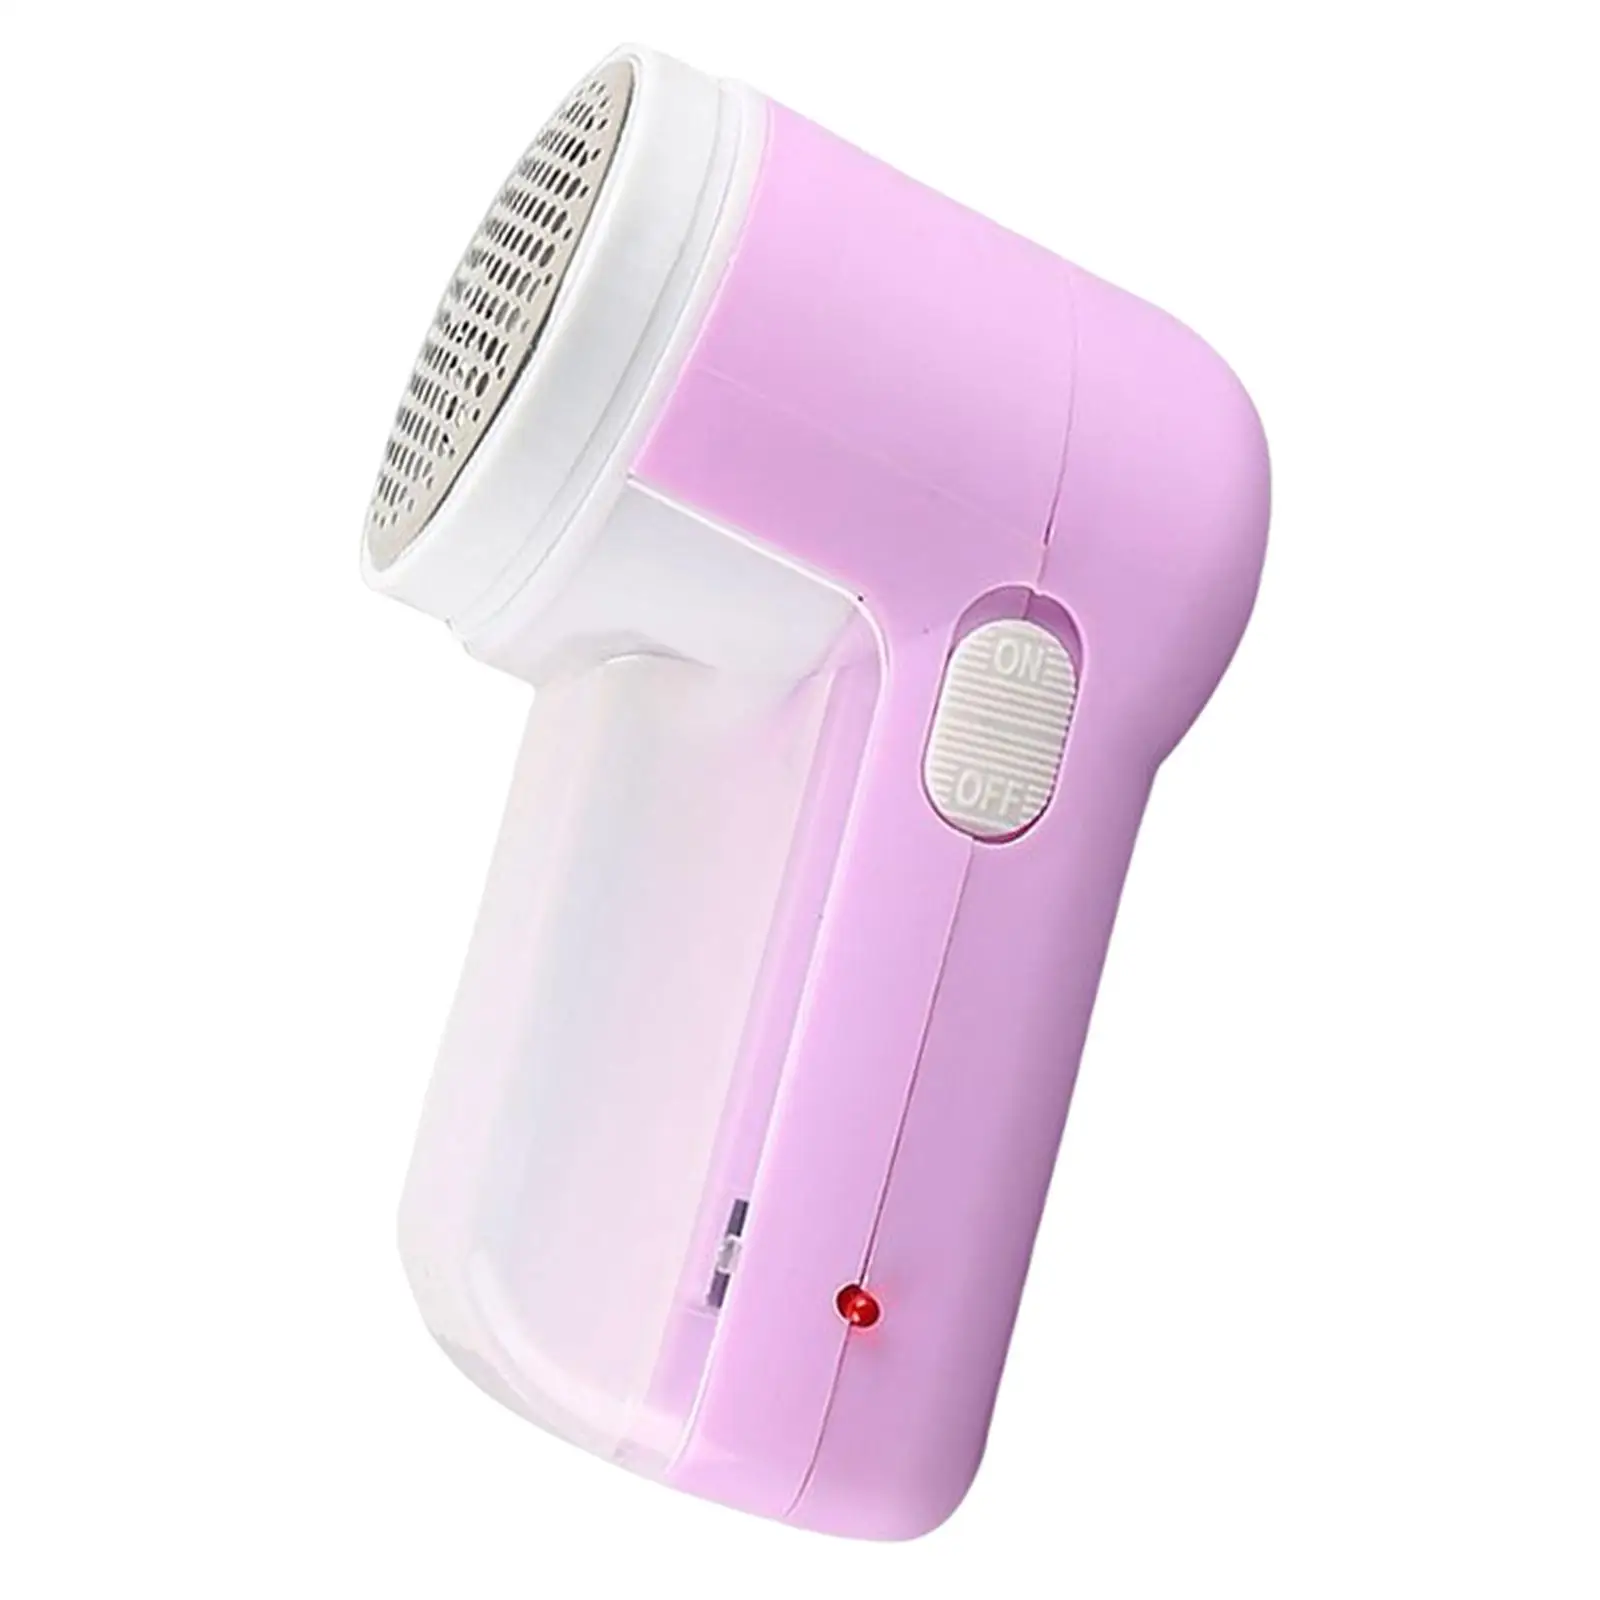 Rechargeable Lint Remover Remove Fuzz Remover Quickly Removing Portable Cleaning Trimmer for Cashmere Bedding Synthetic Fibers